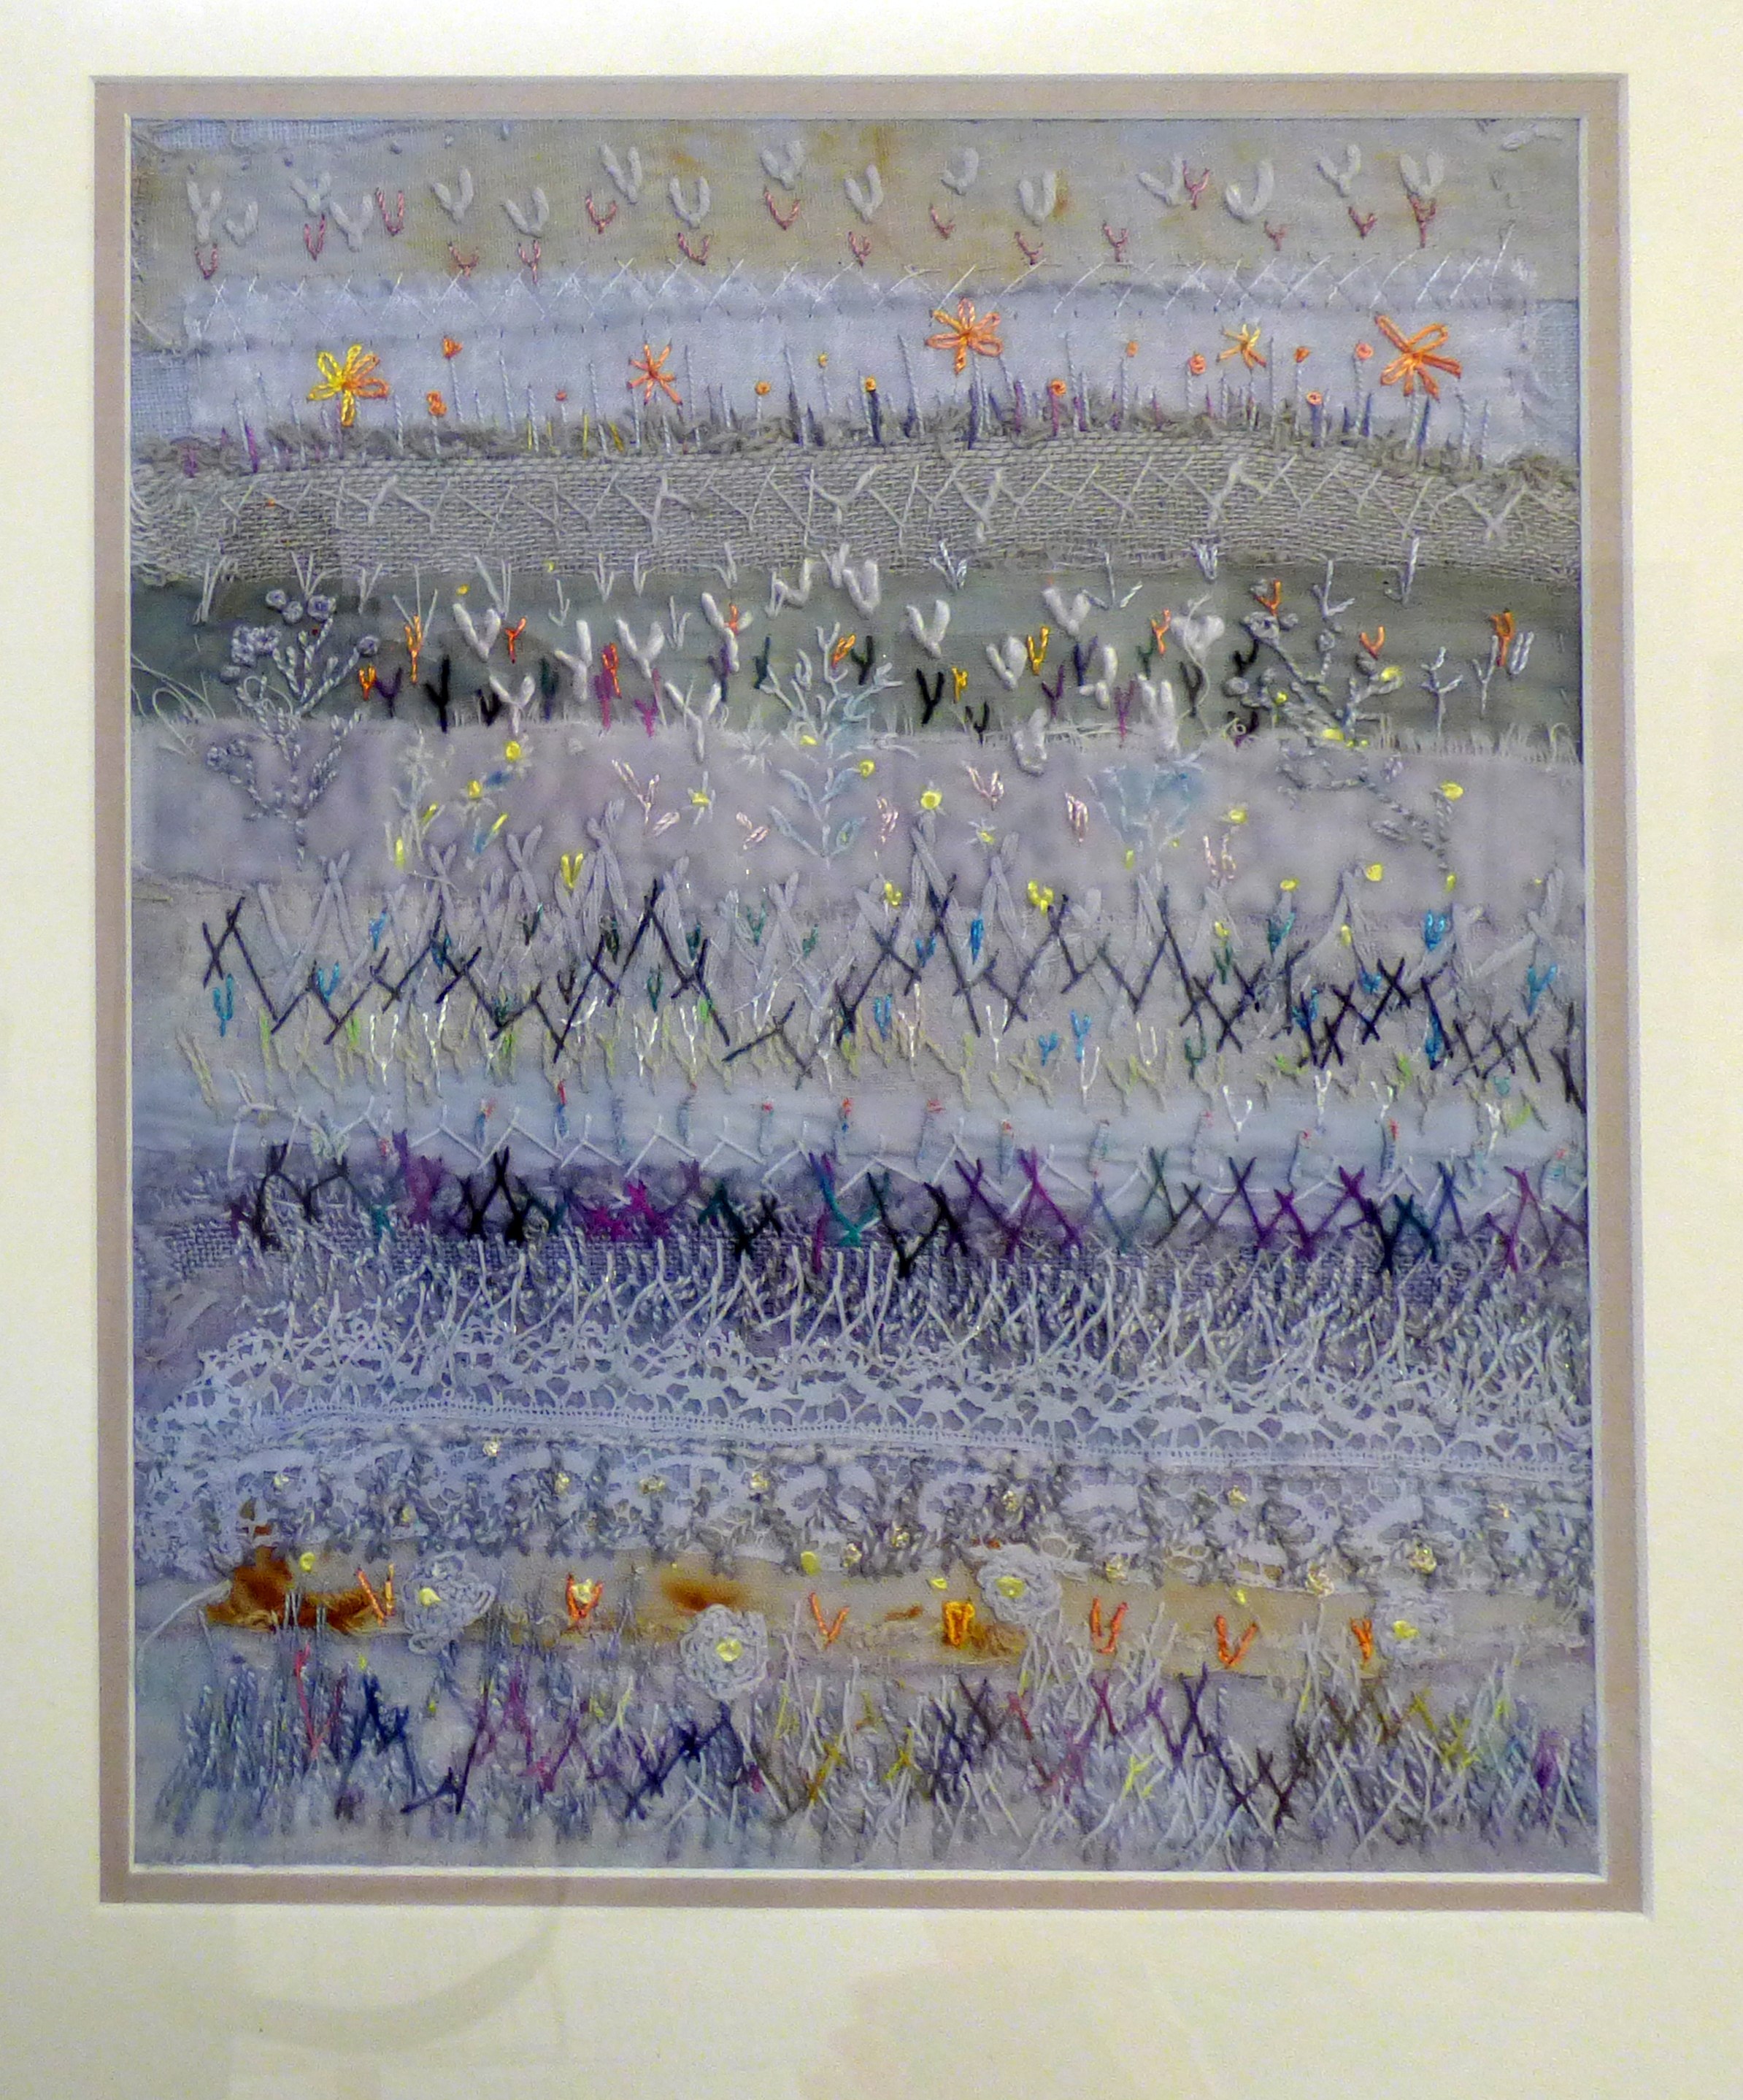 COLOURS OF THE SEA by Janet Vance, collage of hand dyed fabrics and hand stitch, ConText group 2018